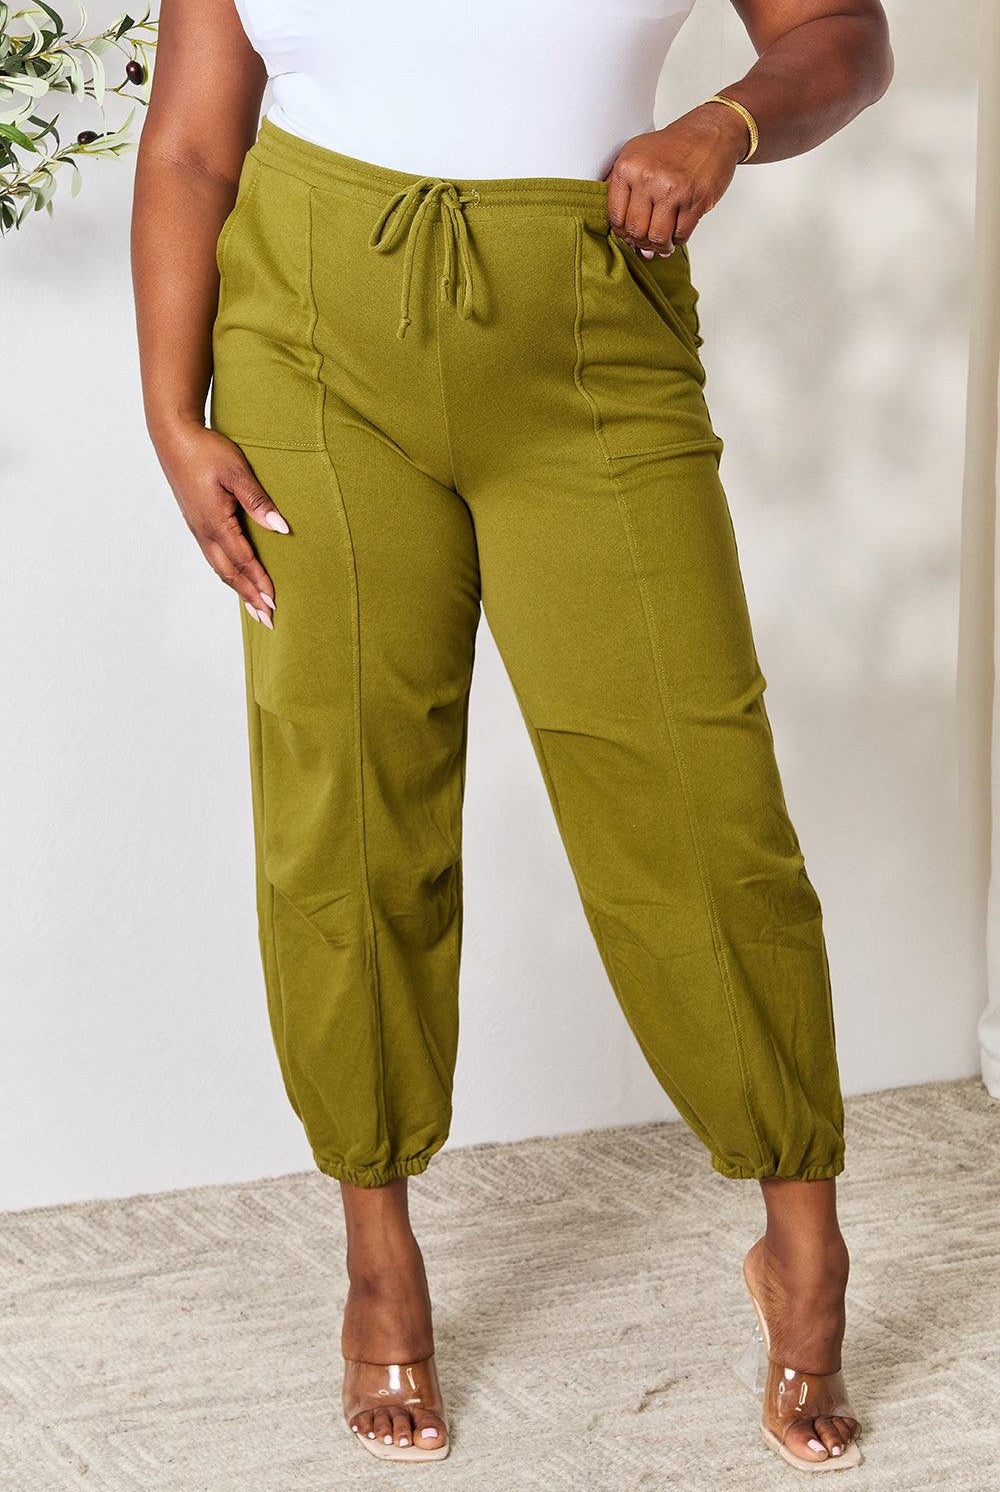 Women's Pants Culture Code Full Size Drawstring Sweatpants with pockets